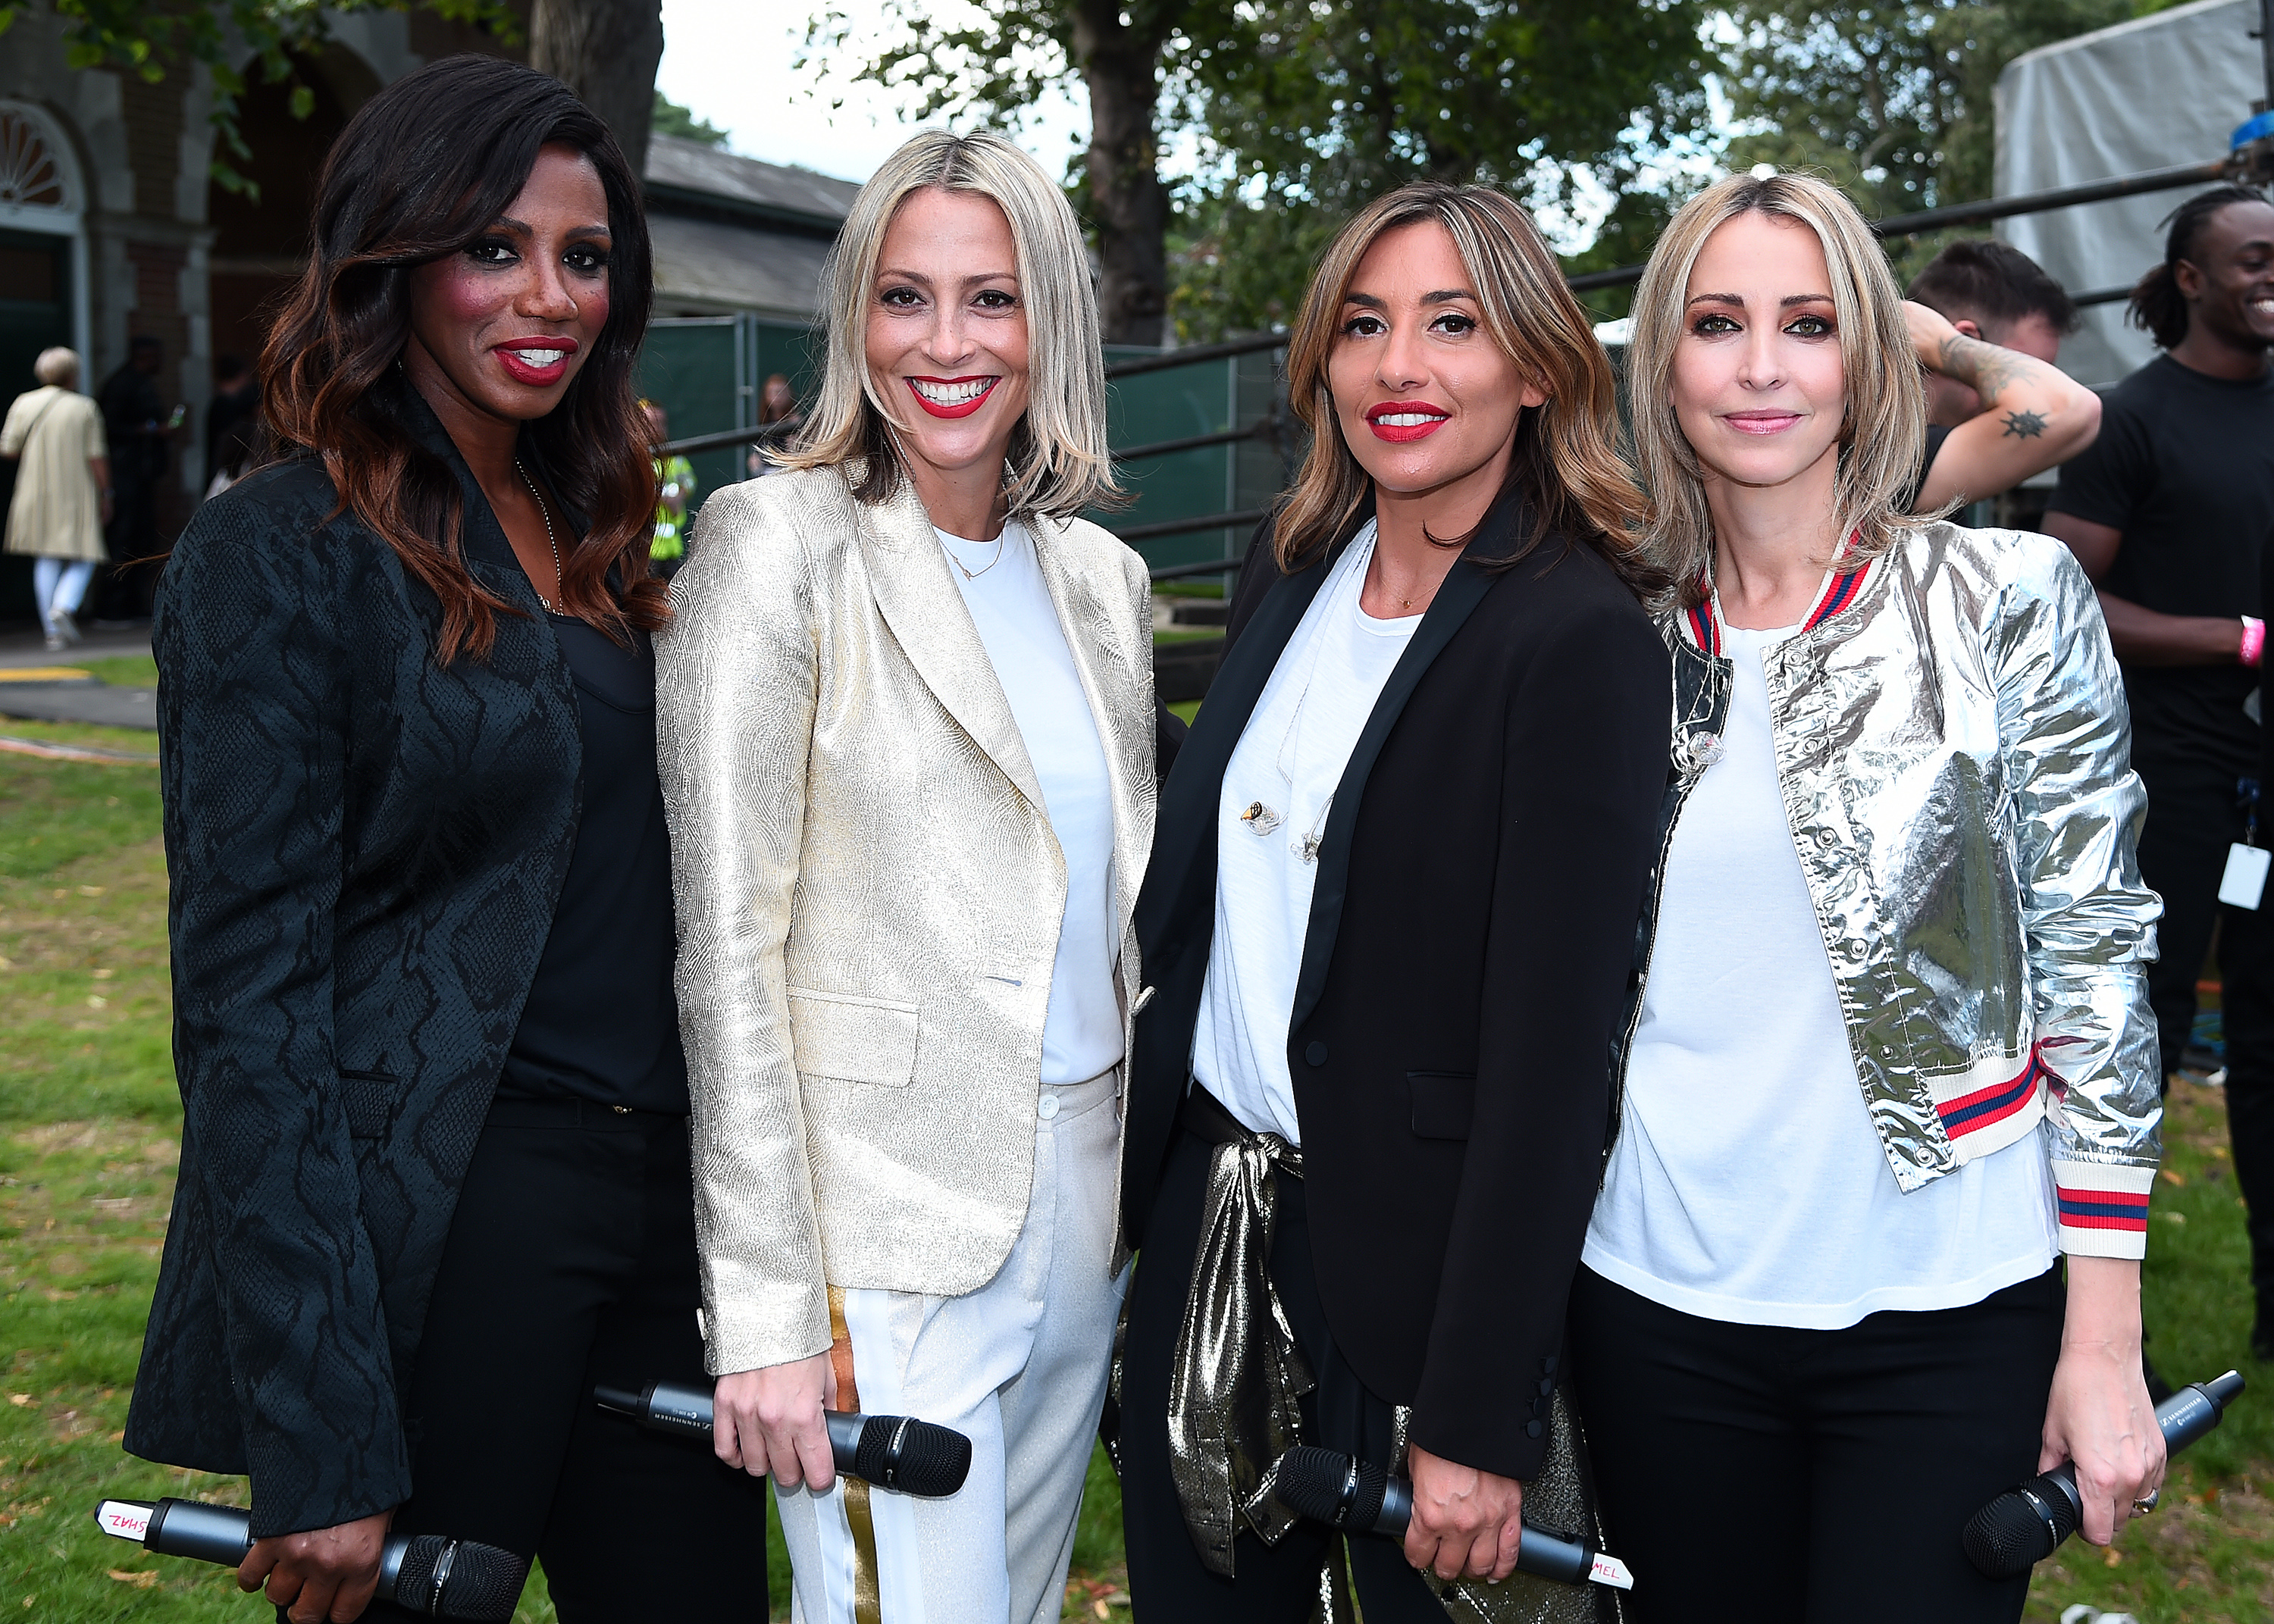 All Saints Support Little Mix’s Claims Against Sexism In Music Industry